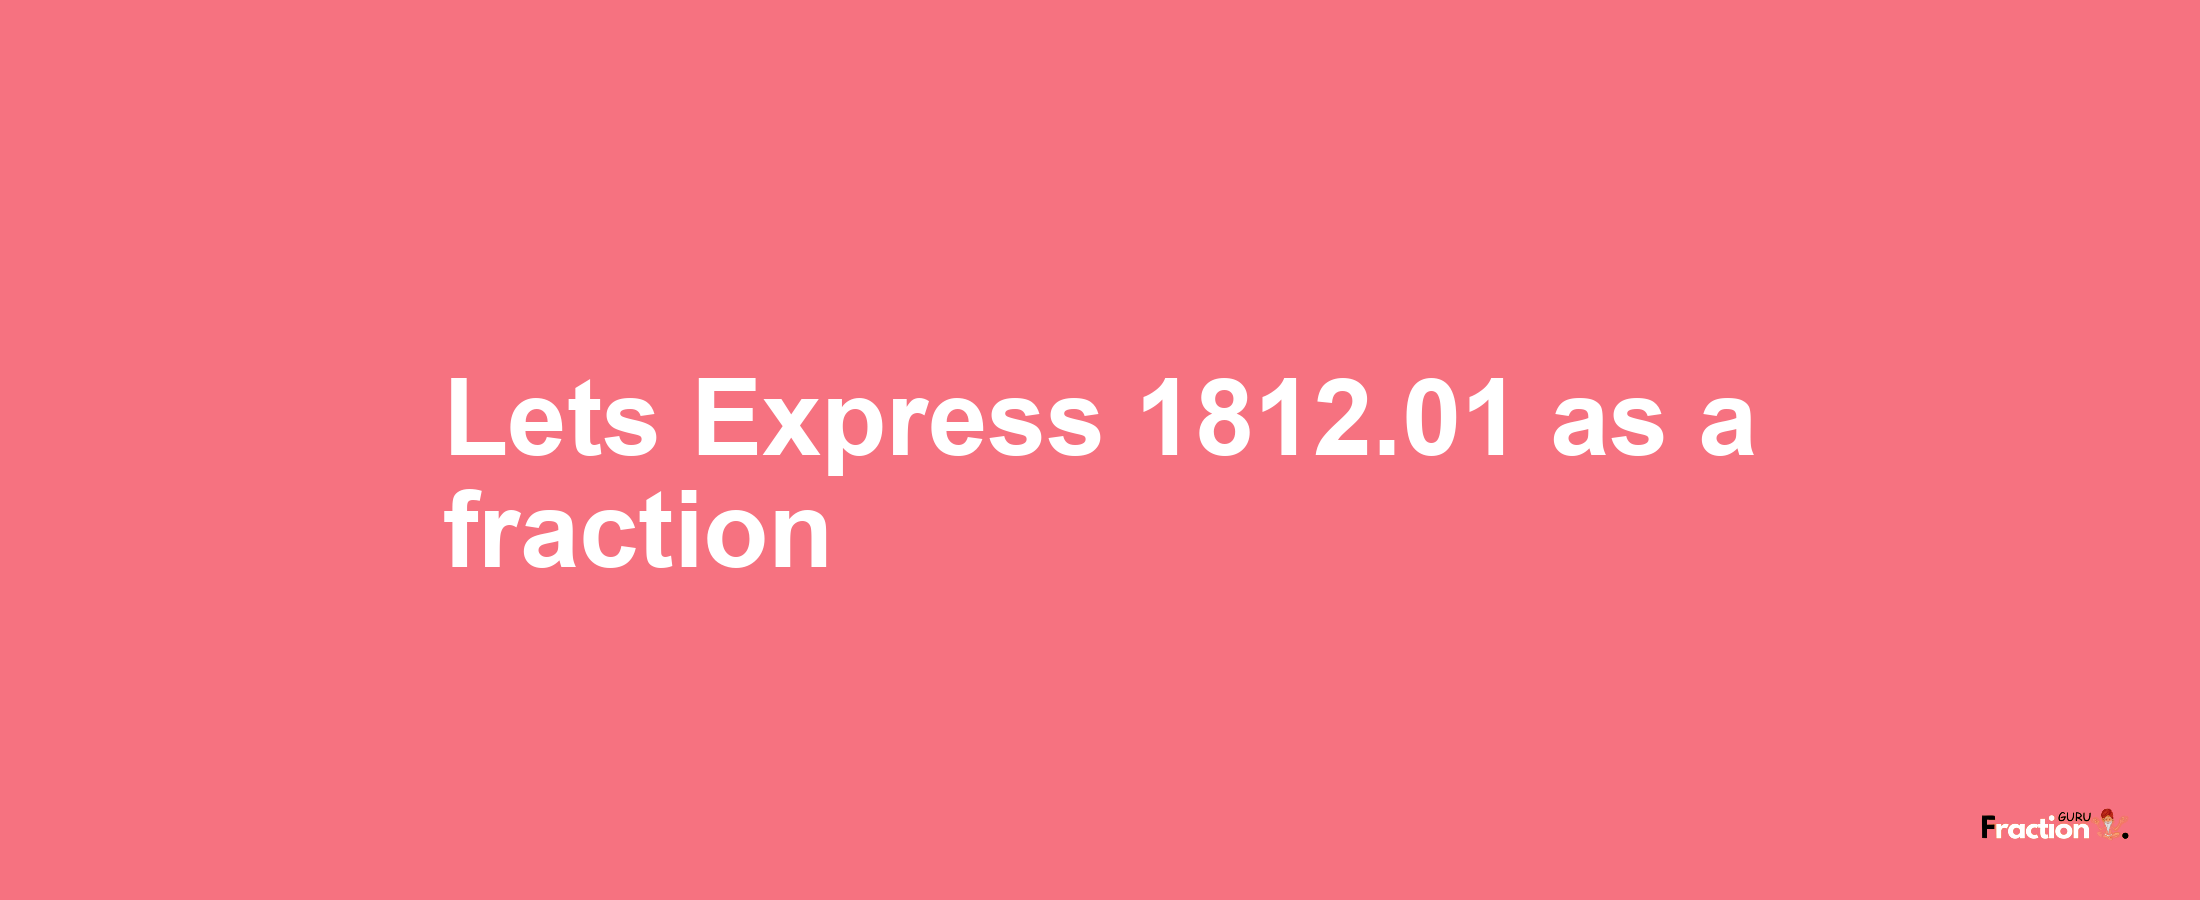 Lets Express 1812.01 as afraction